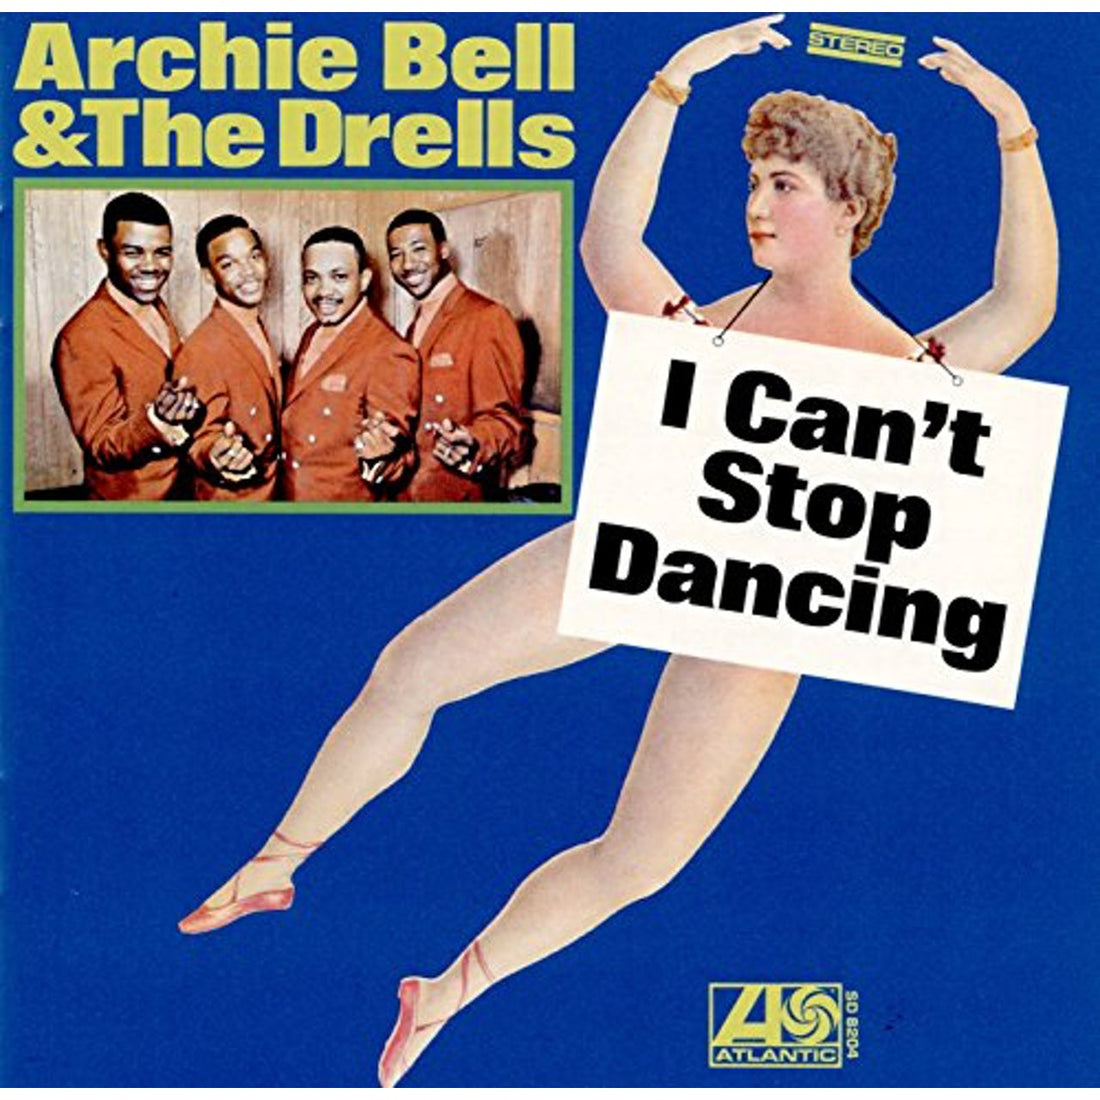 Archie Bell & the Drells- I Can't Stop